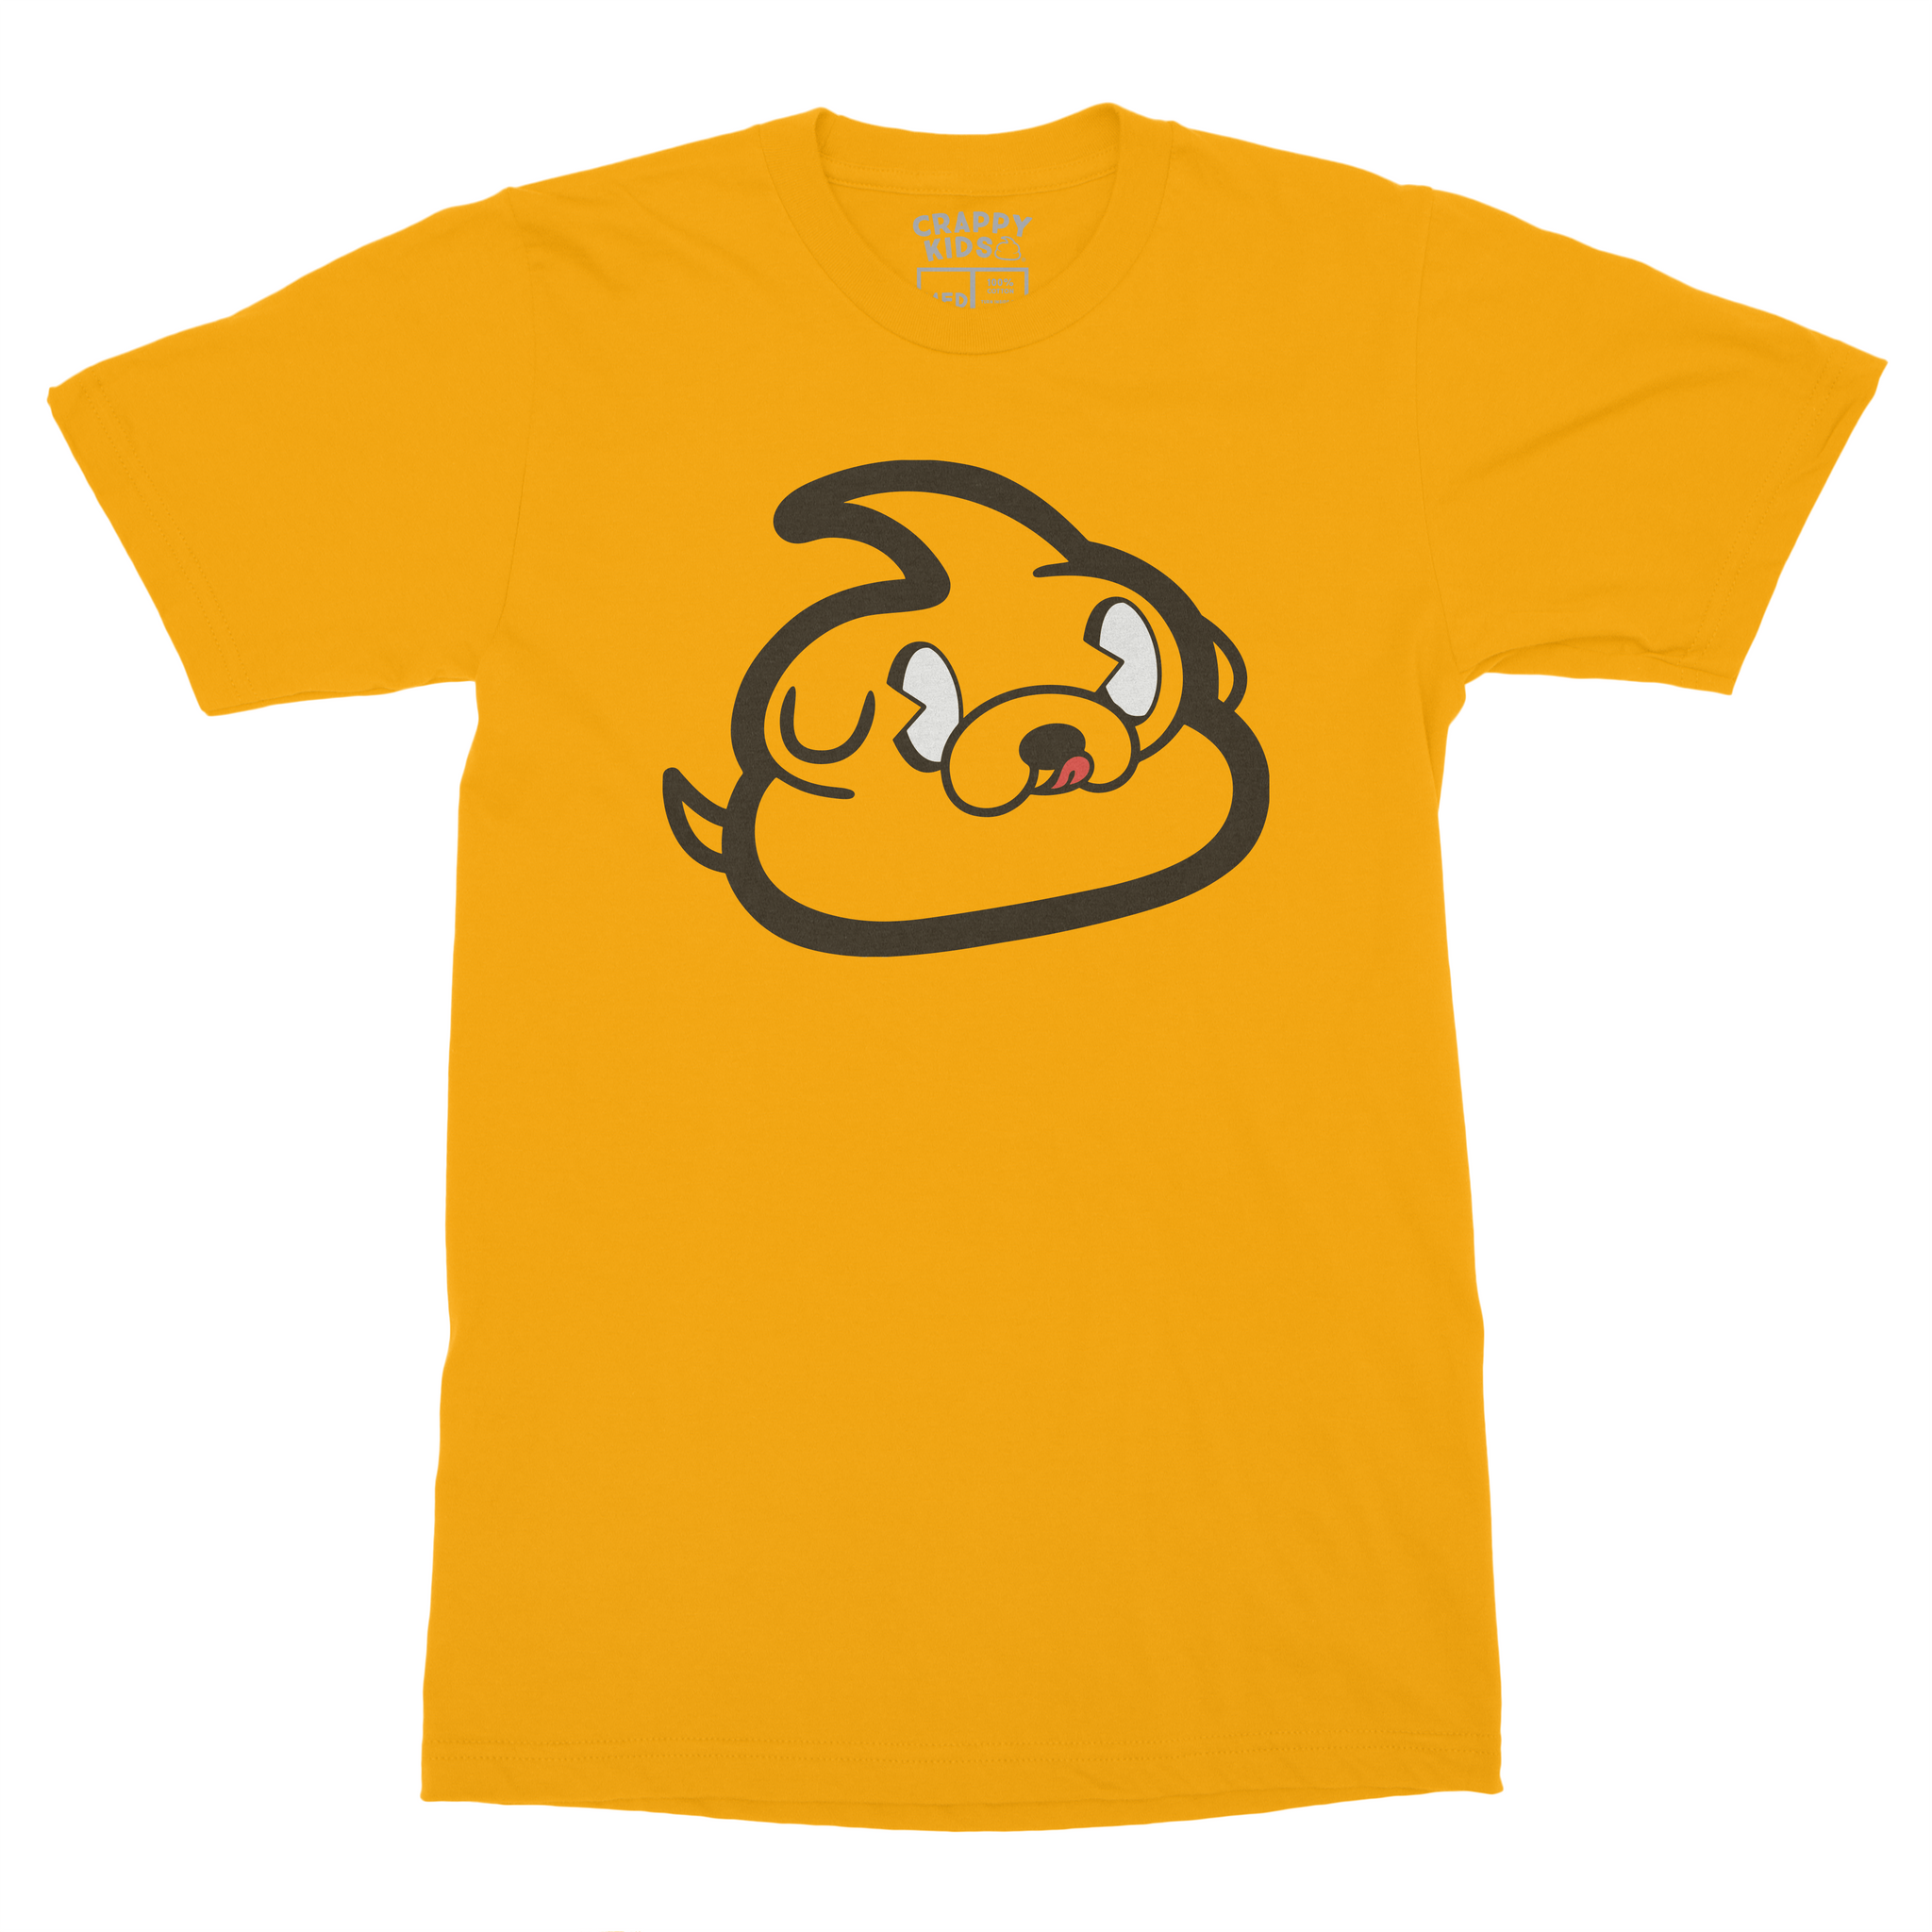 Jake The Poop Andre T-Shirt